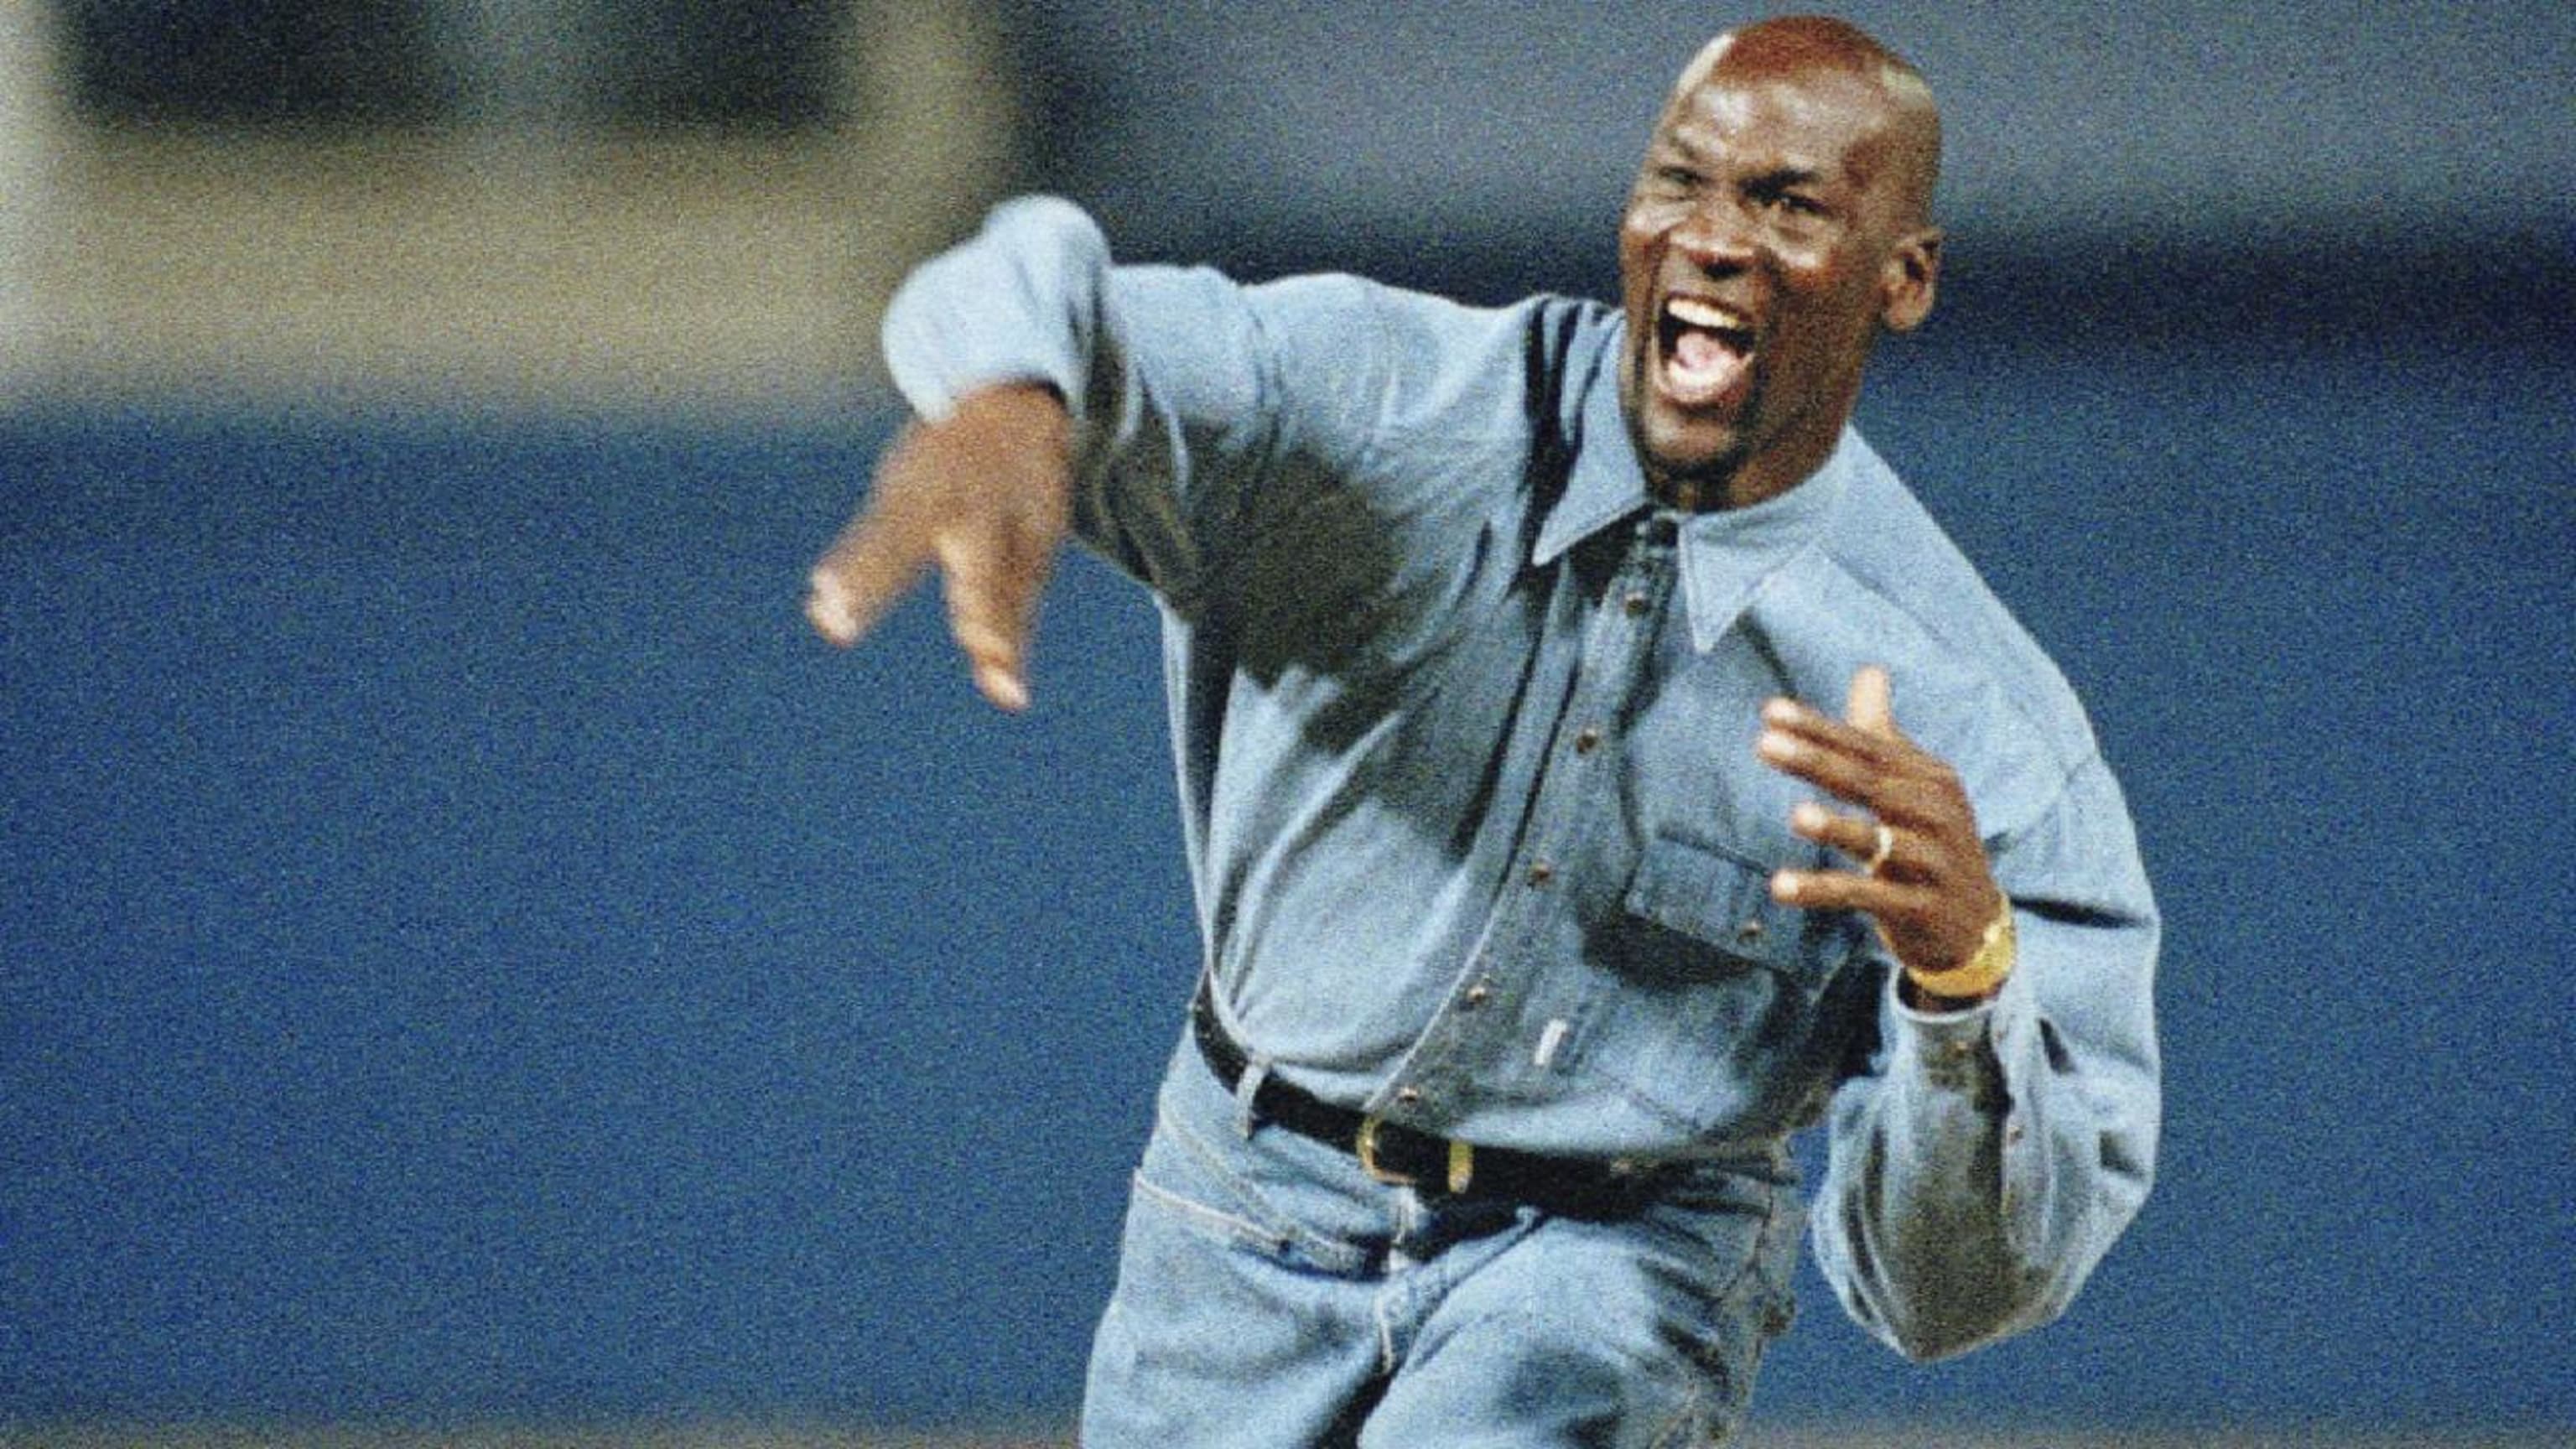 Michael Jordan's only baseball game at Wrigley Field: A look at his clutch  RBI in White Sox-Cubs exhibition 